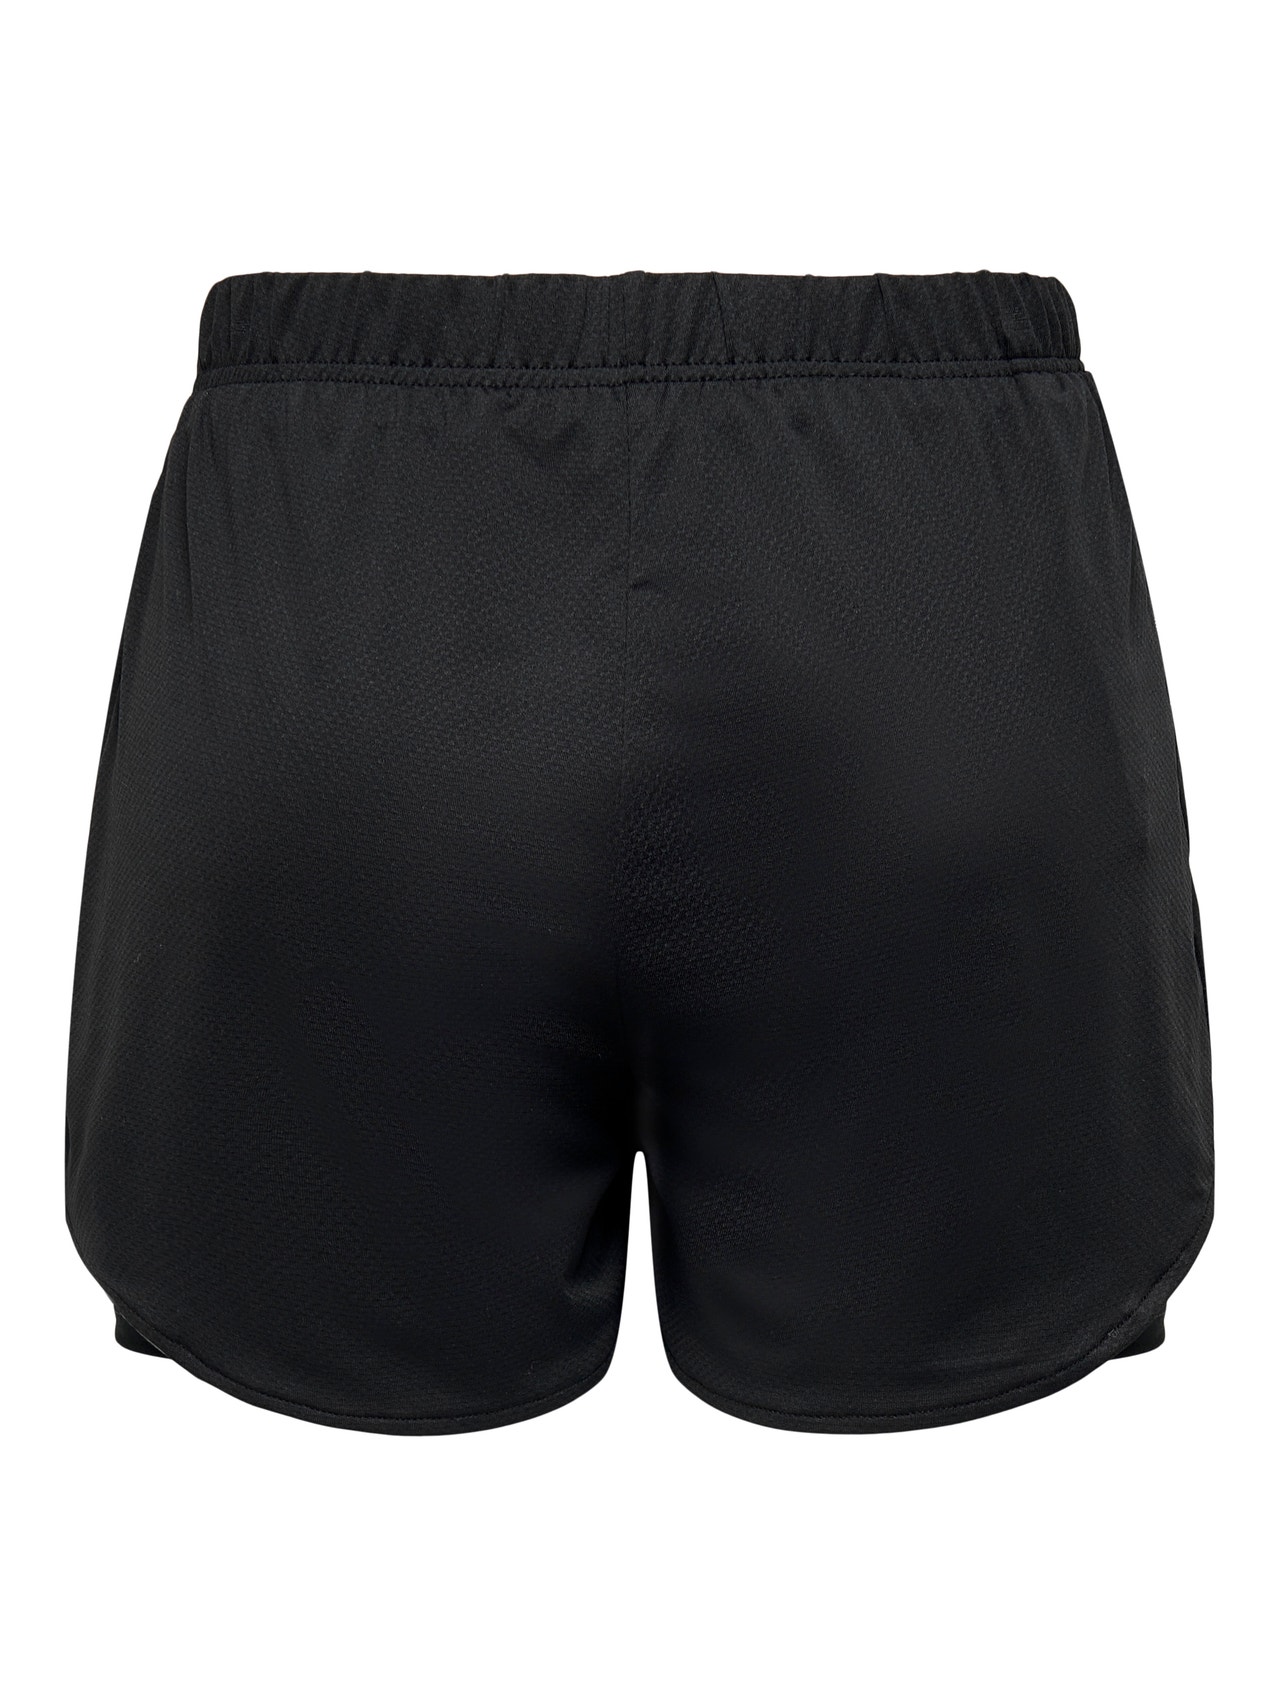 ONLY Loose fit Mid waist Shorts -Black - 15274631